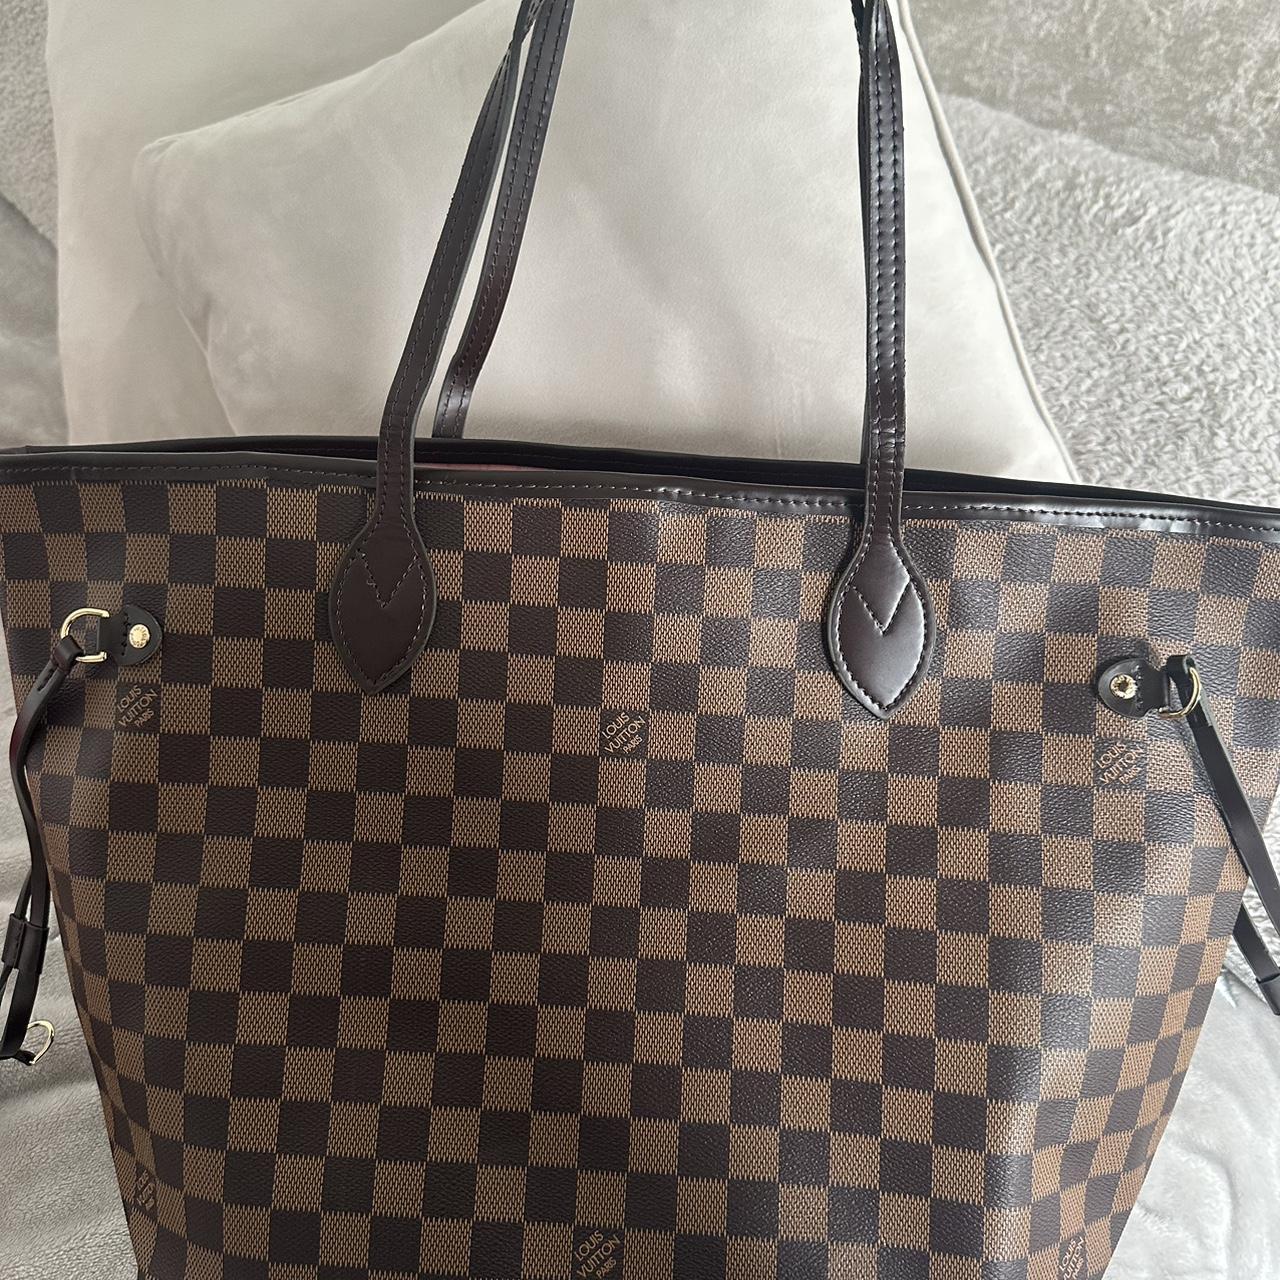 Lv bag+small purse Price is obvious if auth or not - Depop